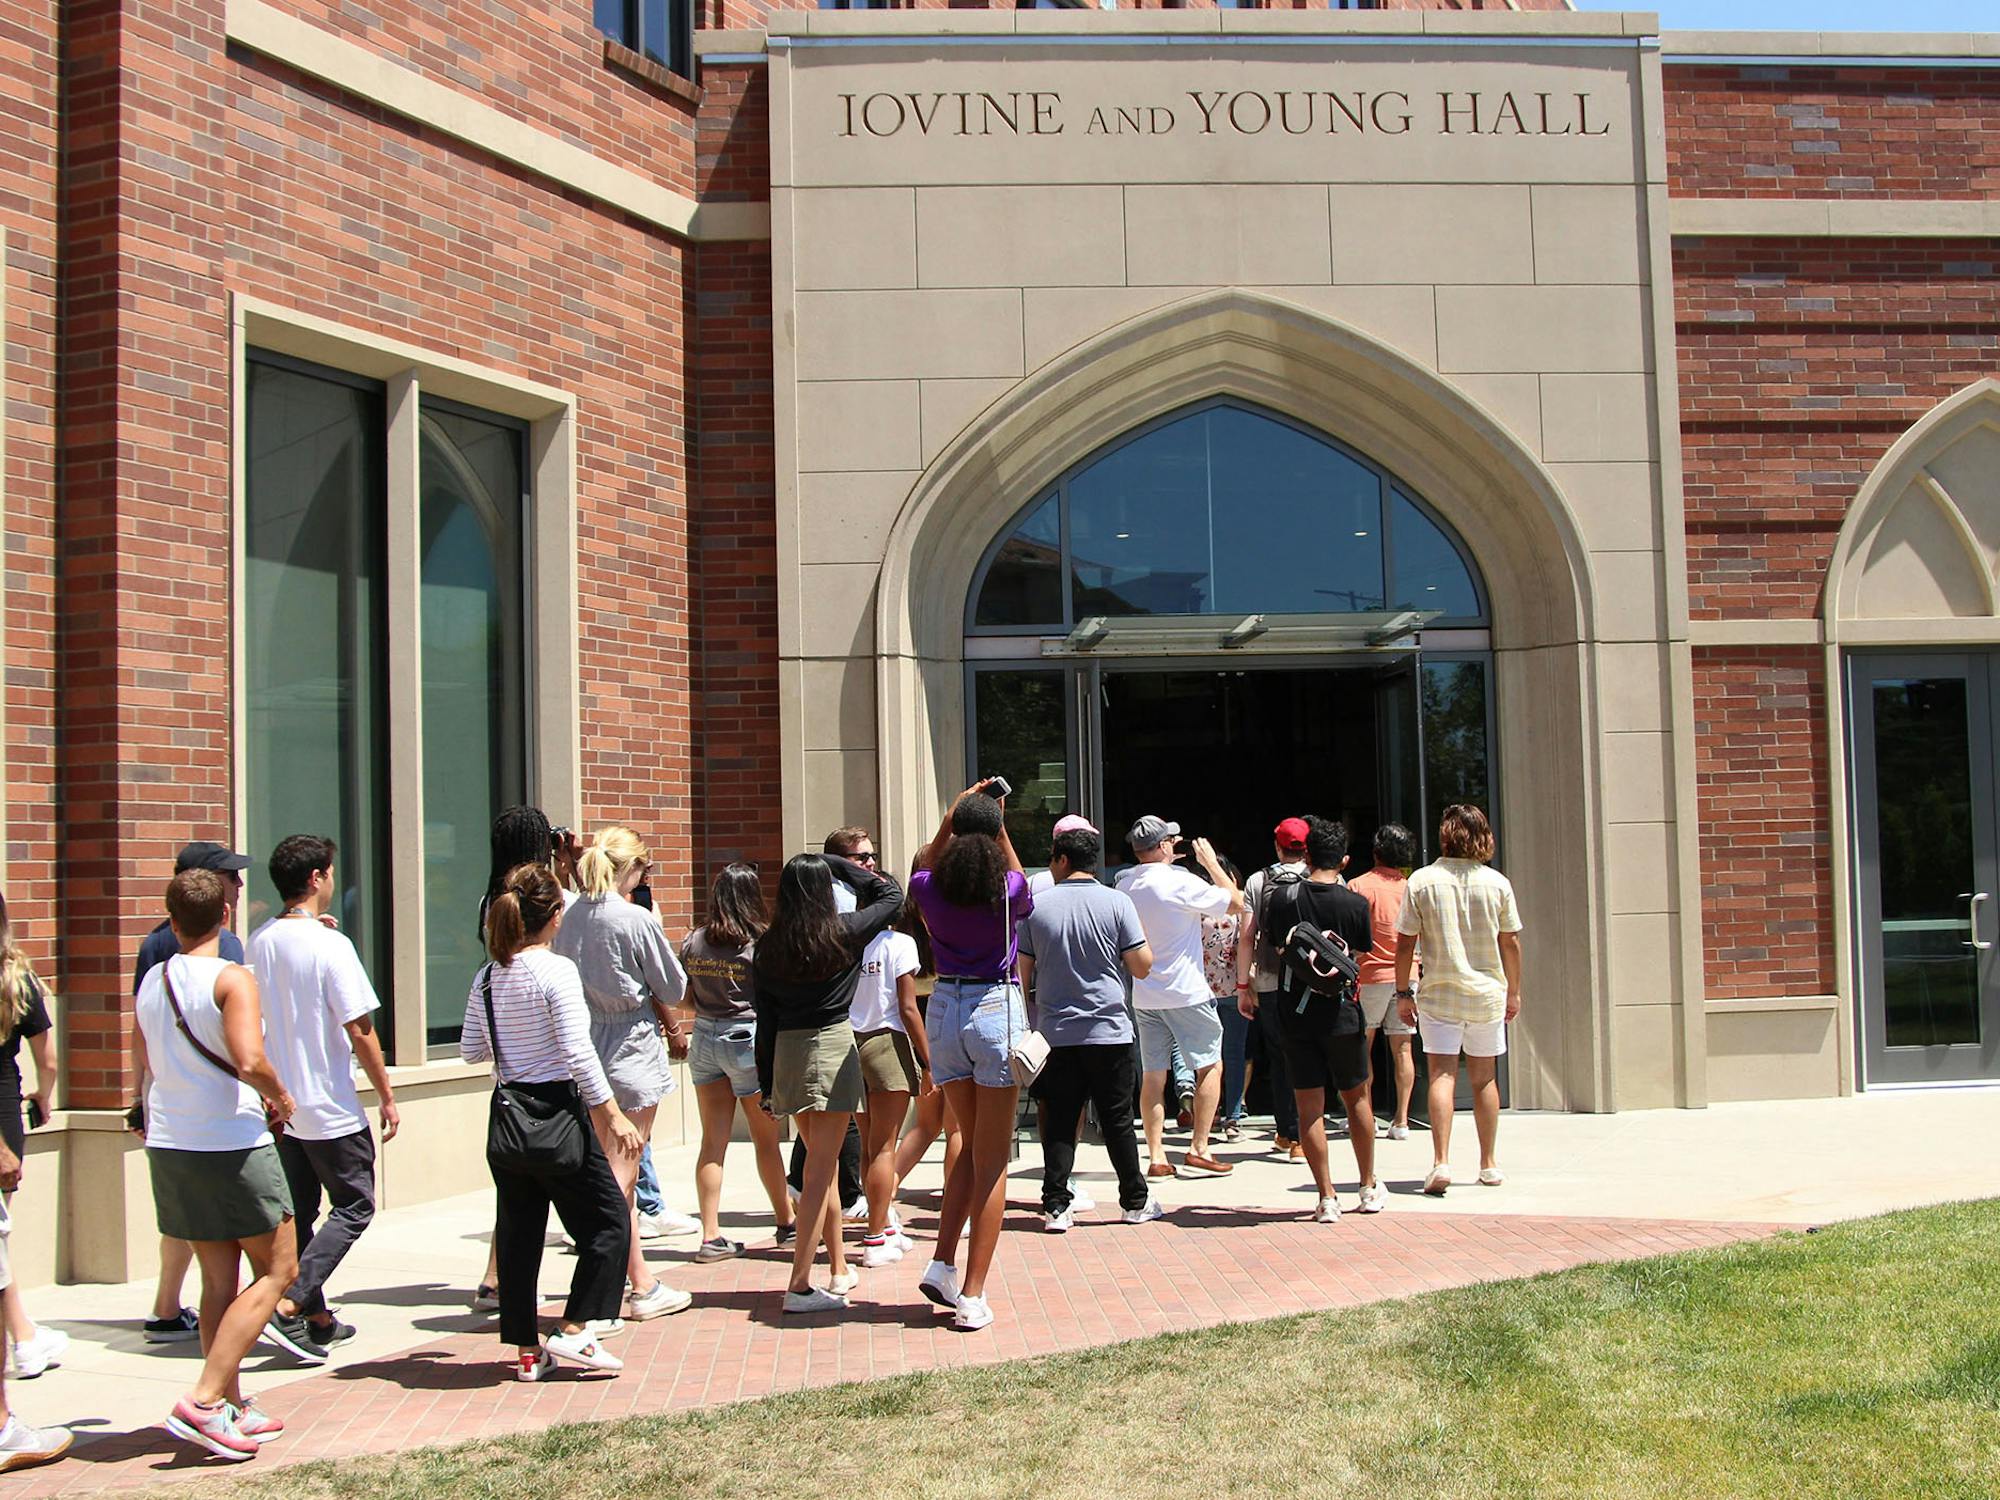 A group of students walking into Iovine and Young Hall